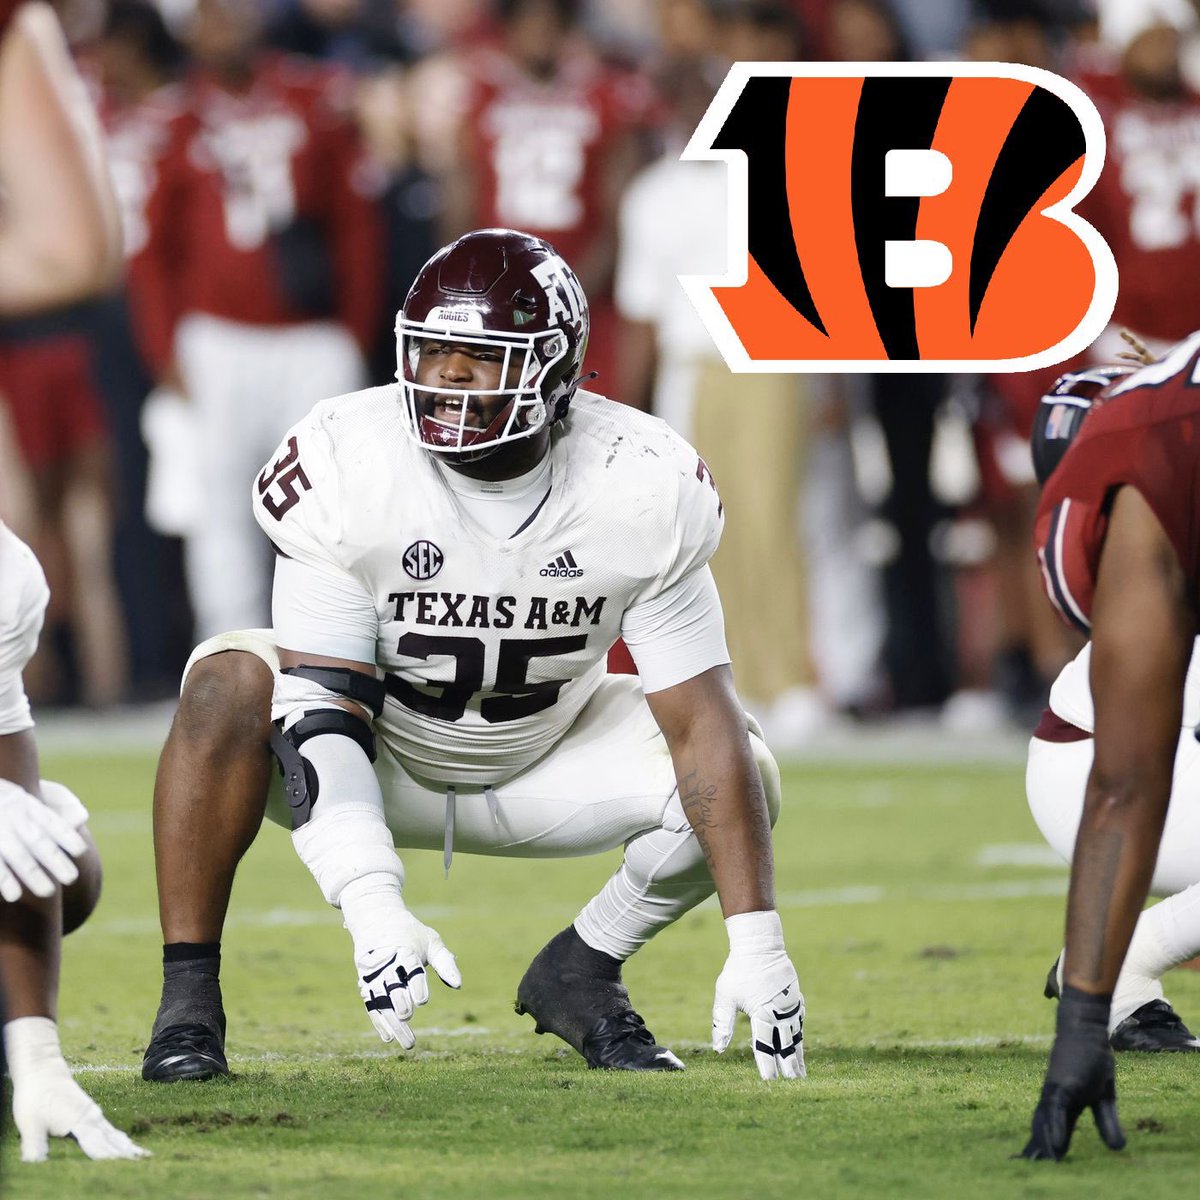 BREAKING: Texas A&M defensive lineman McKinnley Jackson has been selected by the Cincinnati Bengals with the 97th pick!